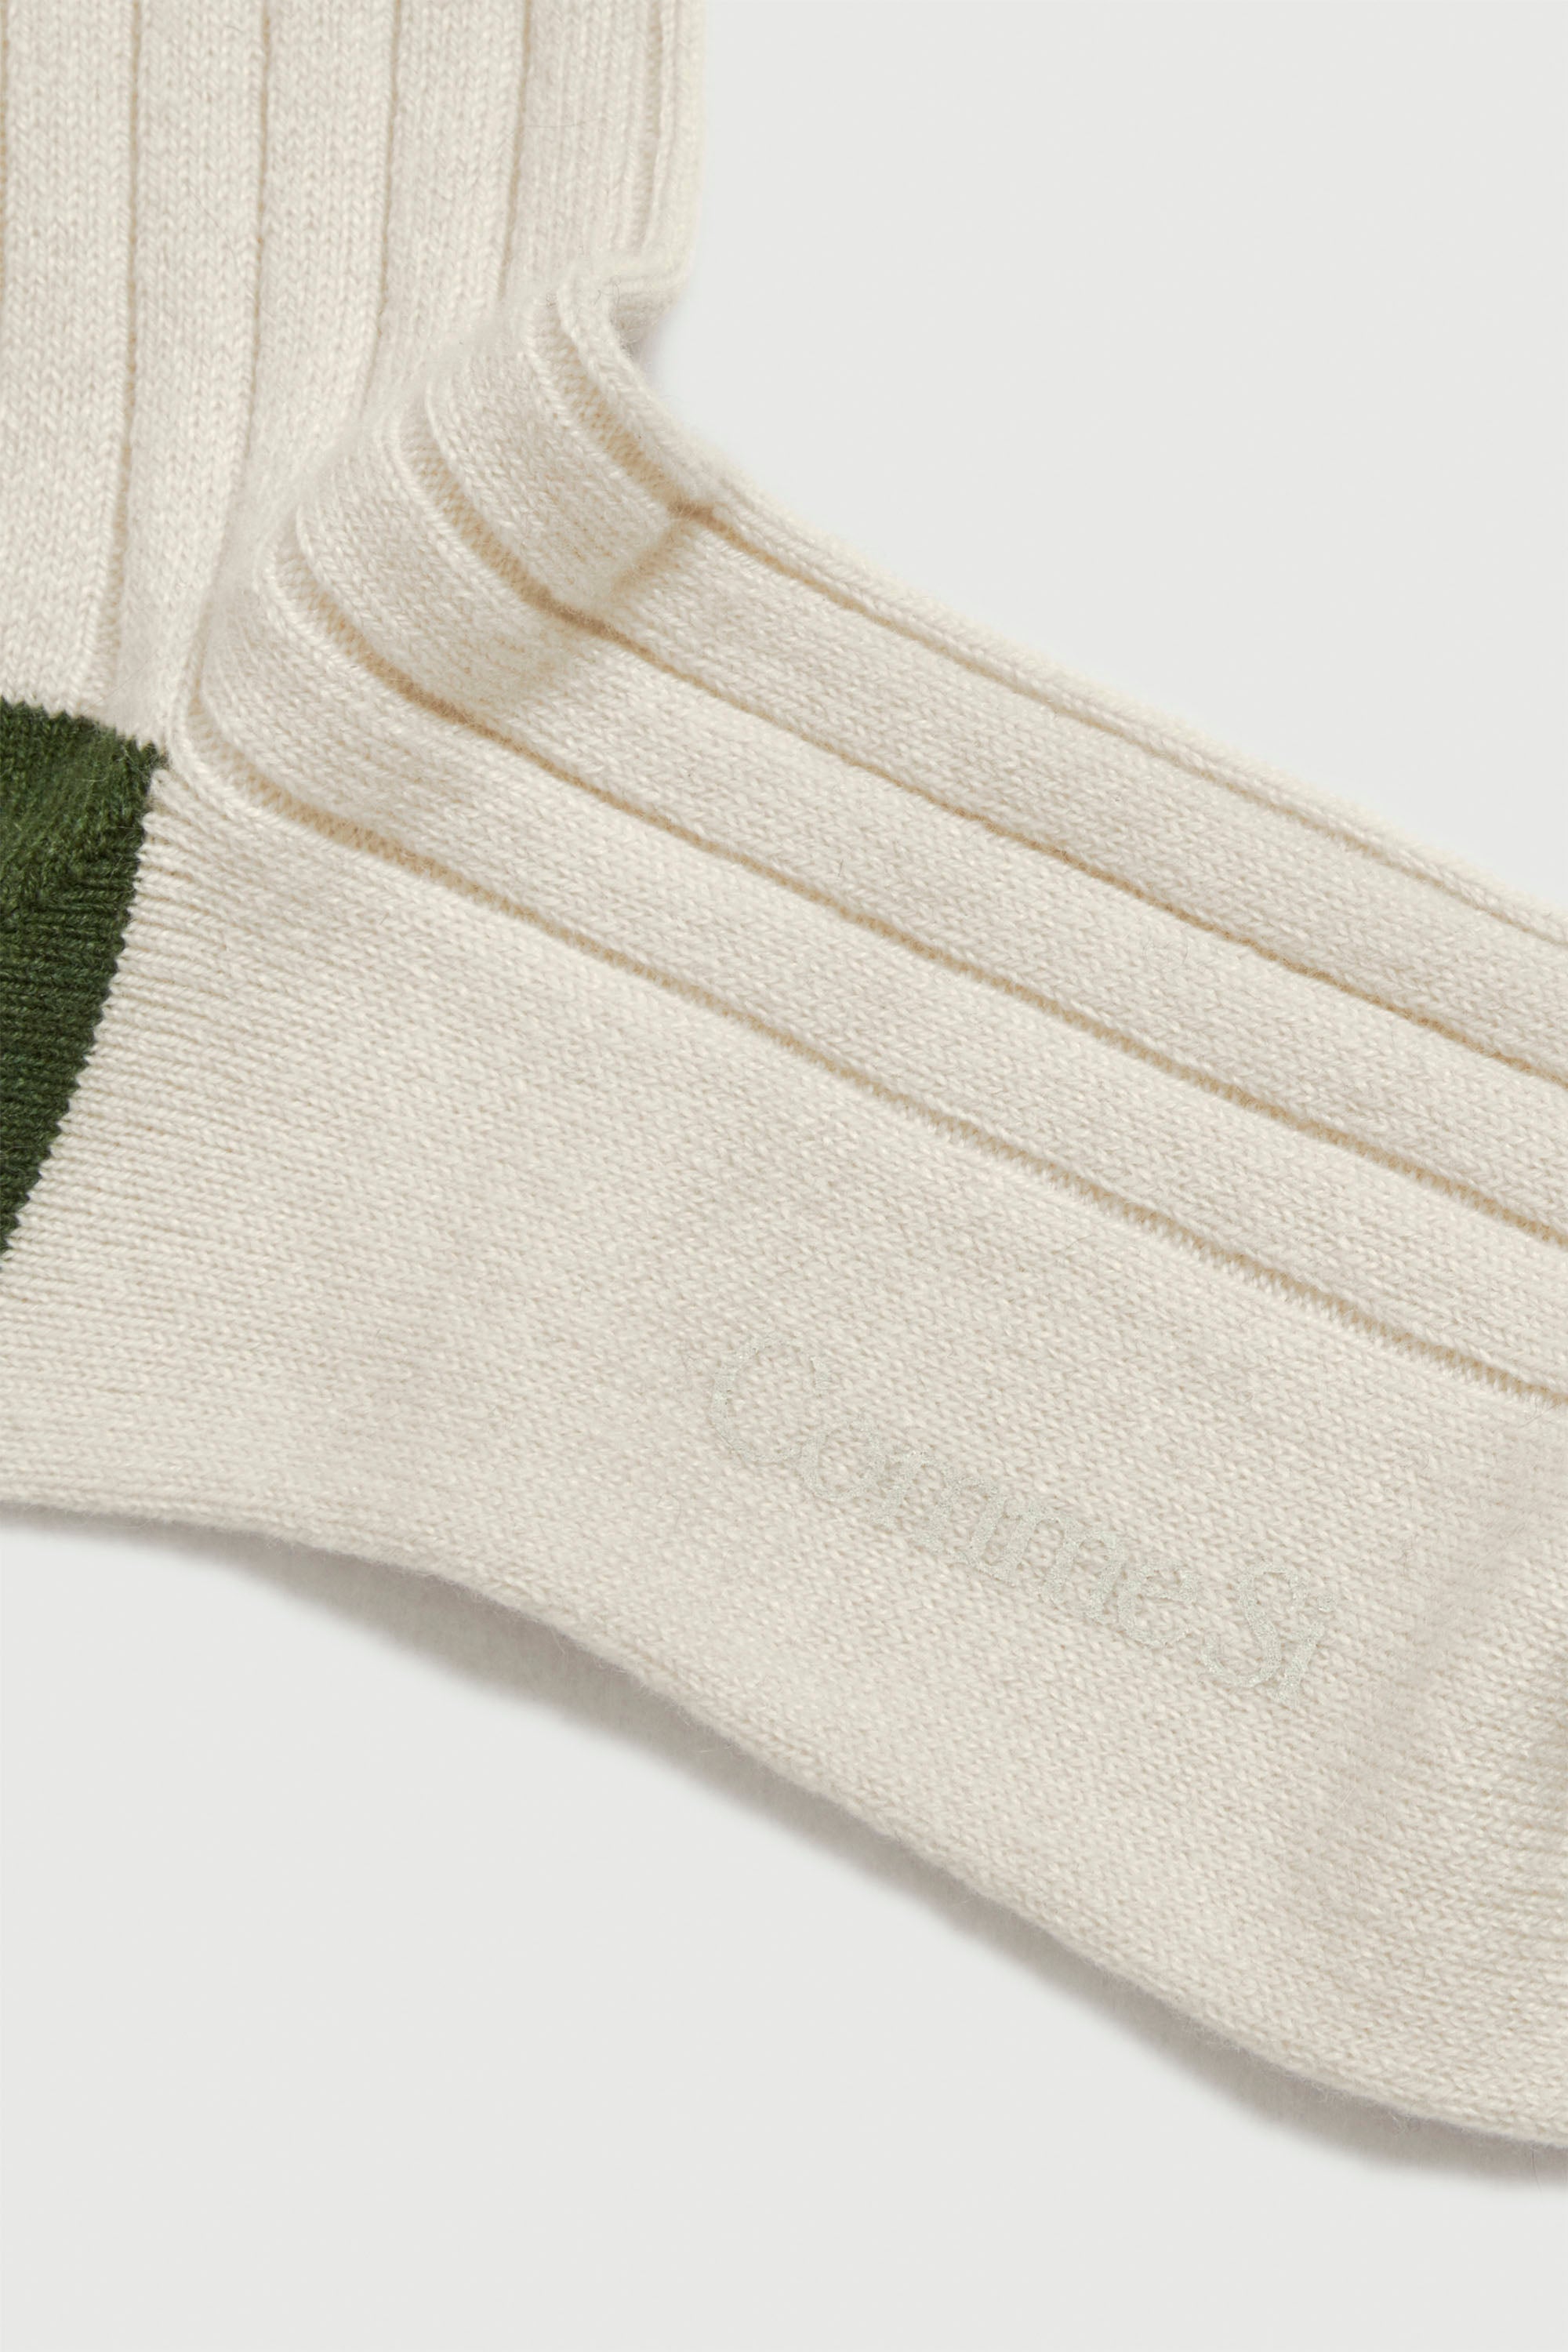 Footbed detail, The Danielle Sock, Color Block, Cashmere, Cream Forest